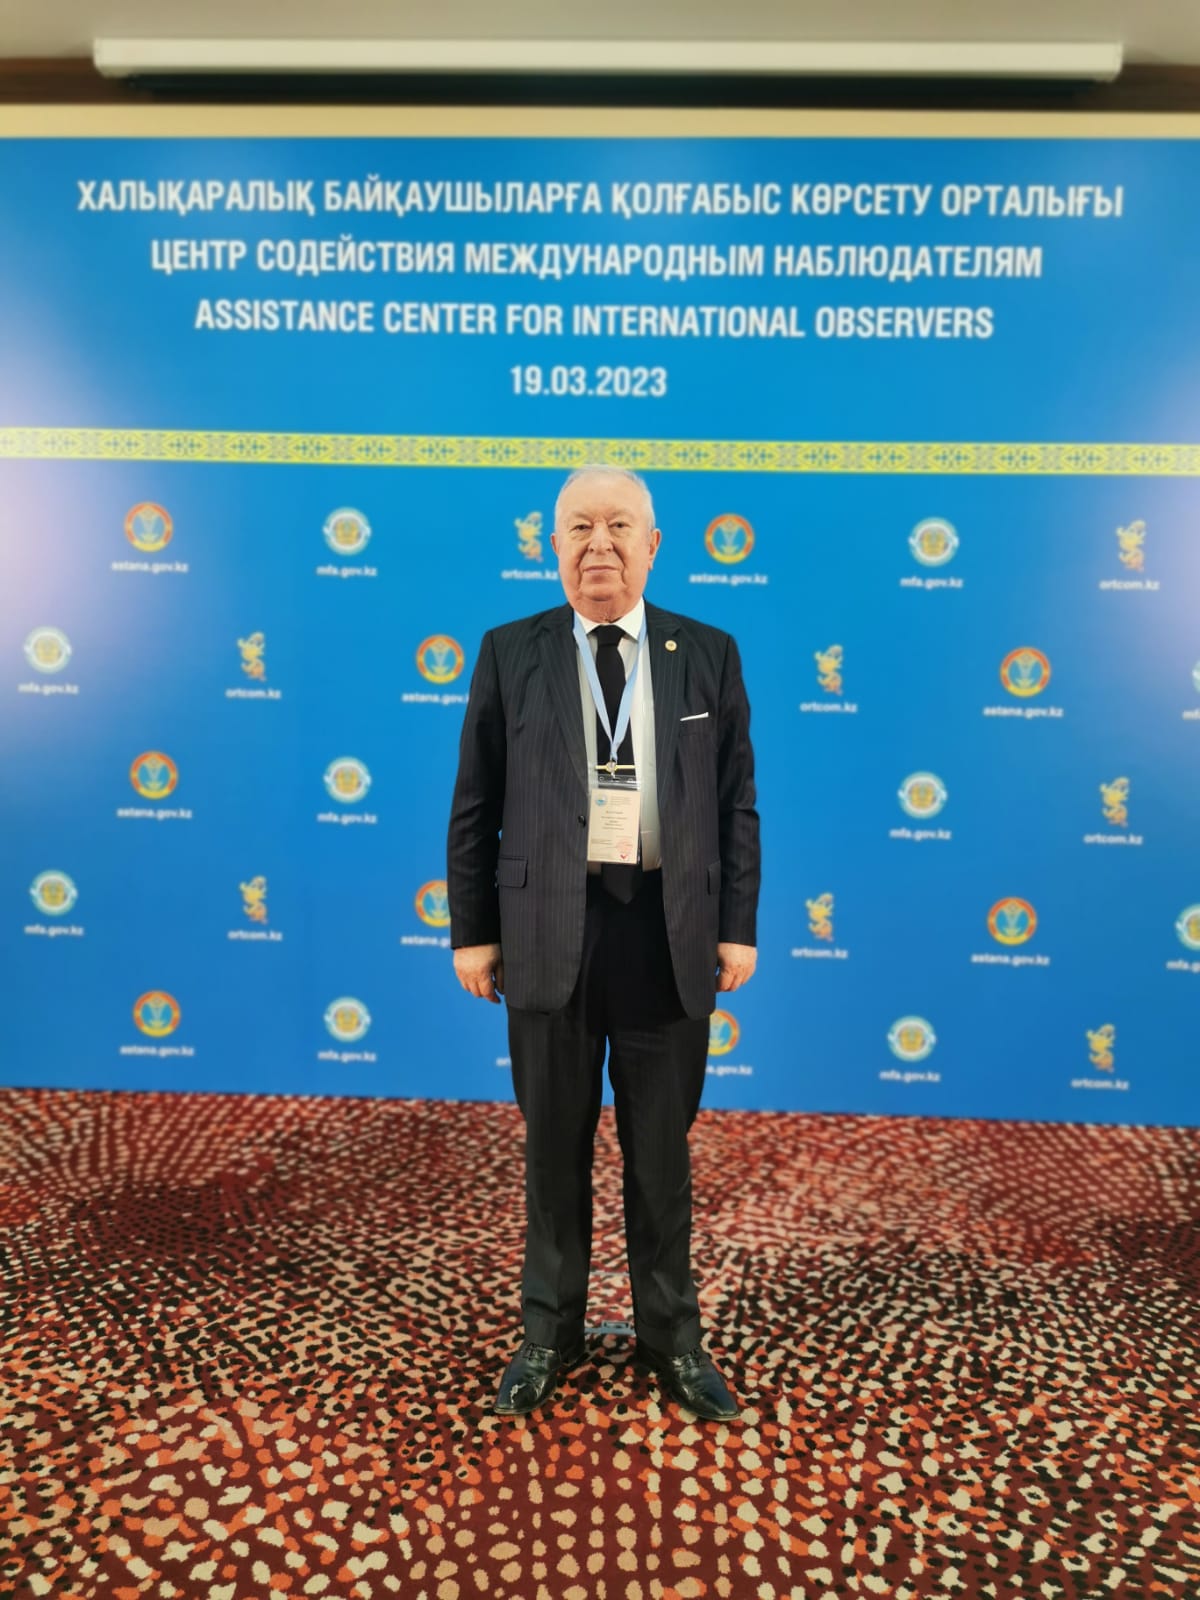 Dr. Akkan Suver participated in the Kazakhstan election